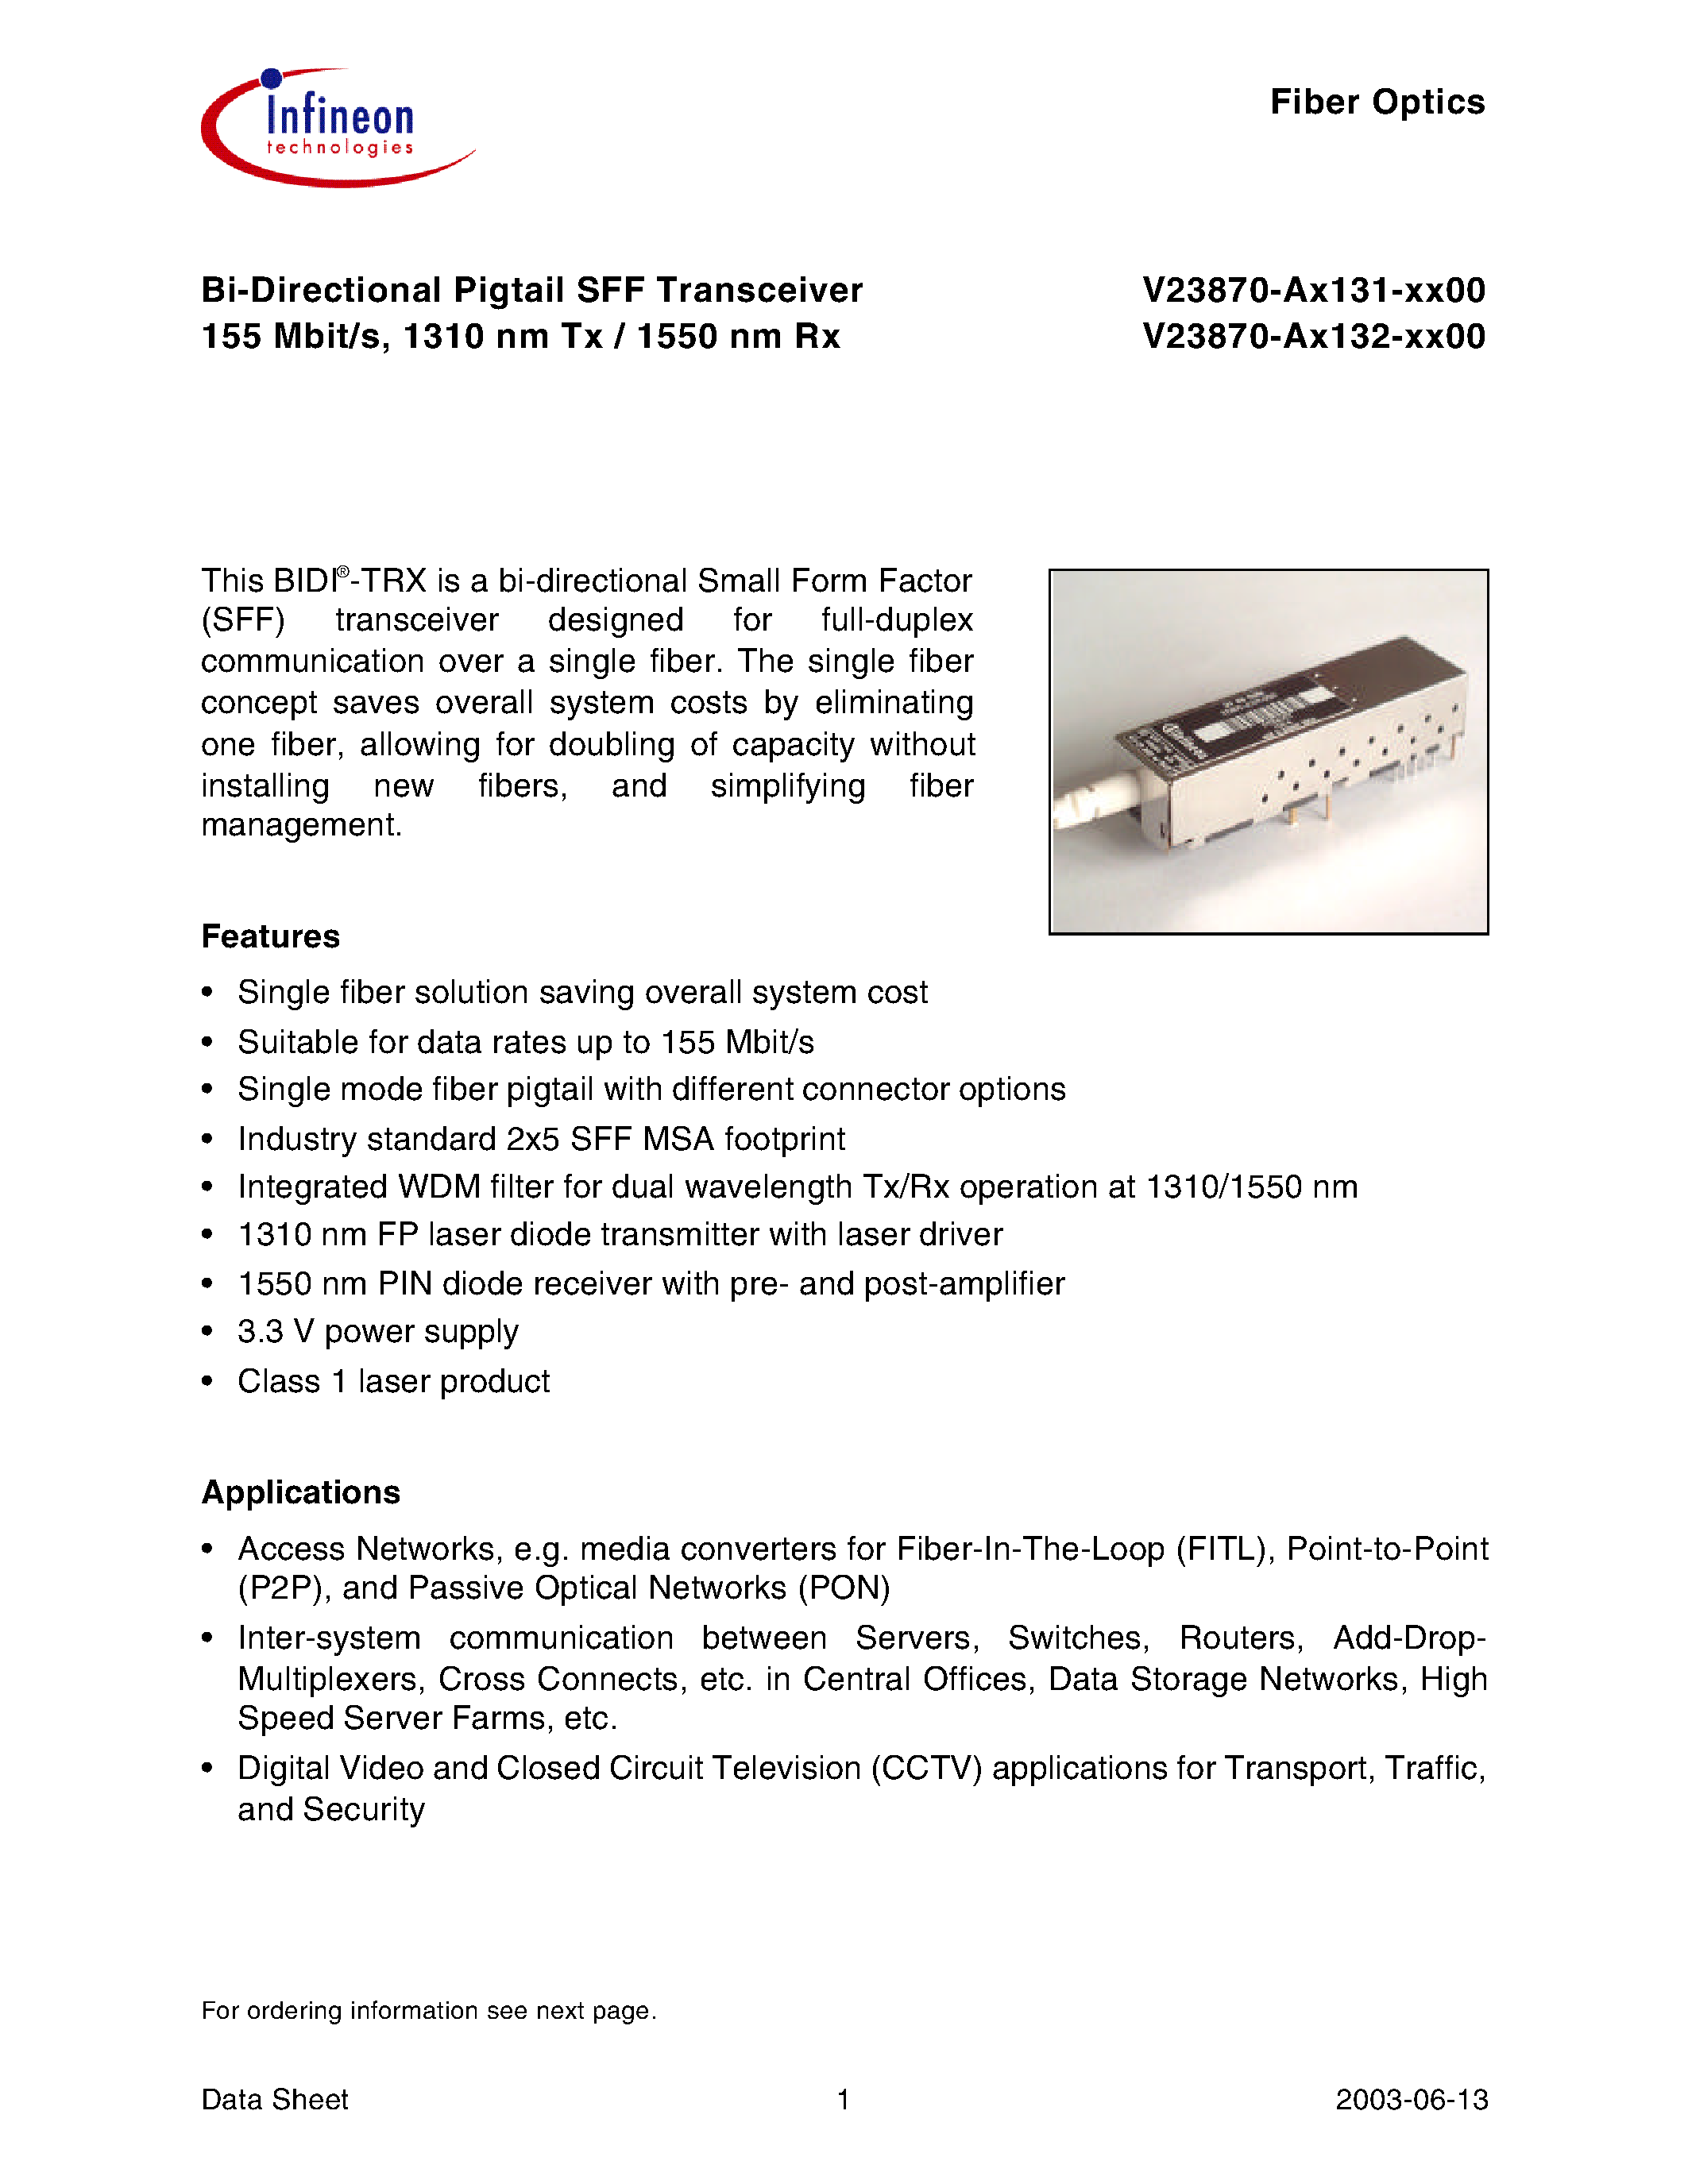 Datasheet V23870-A1131-H600 - Bi-Directional Pigtail SFF Transceiver 155 Mbit/s/ 1310 nm Tx / 1550 nm Rx page 1